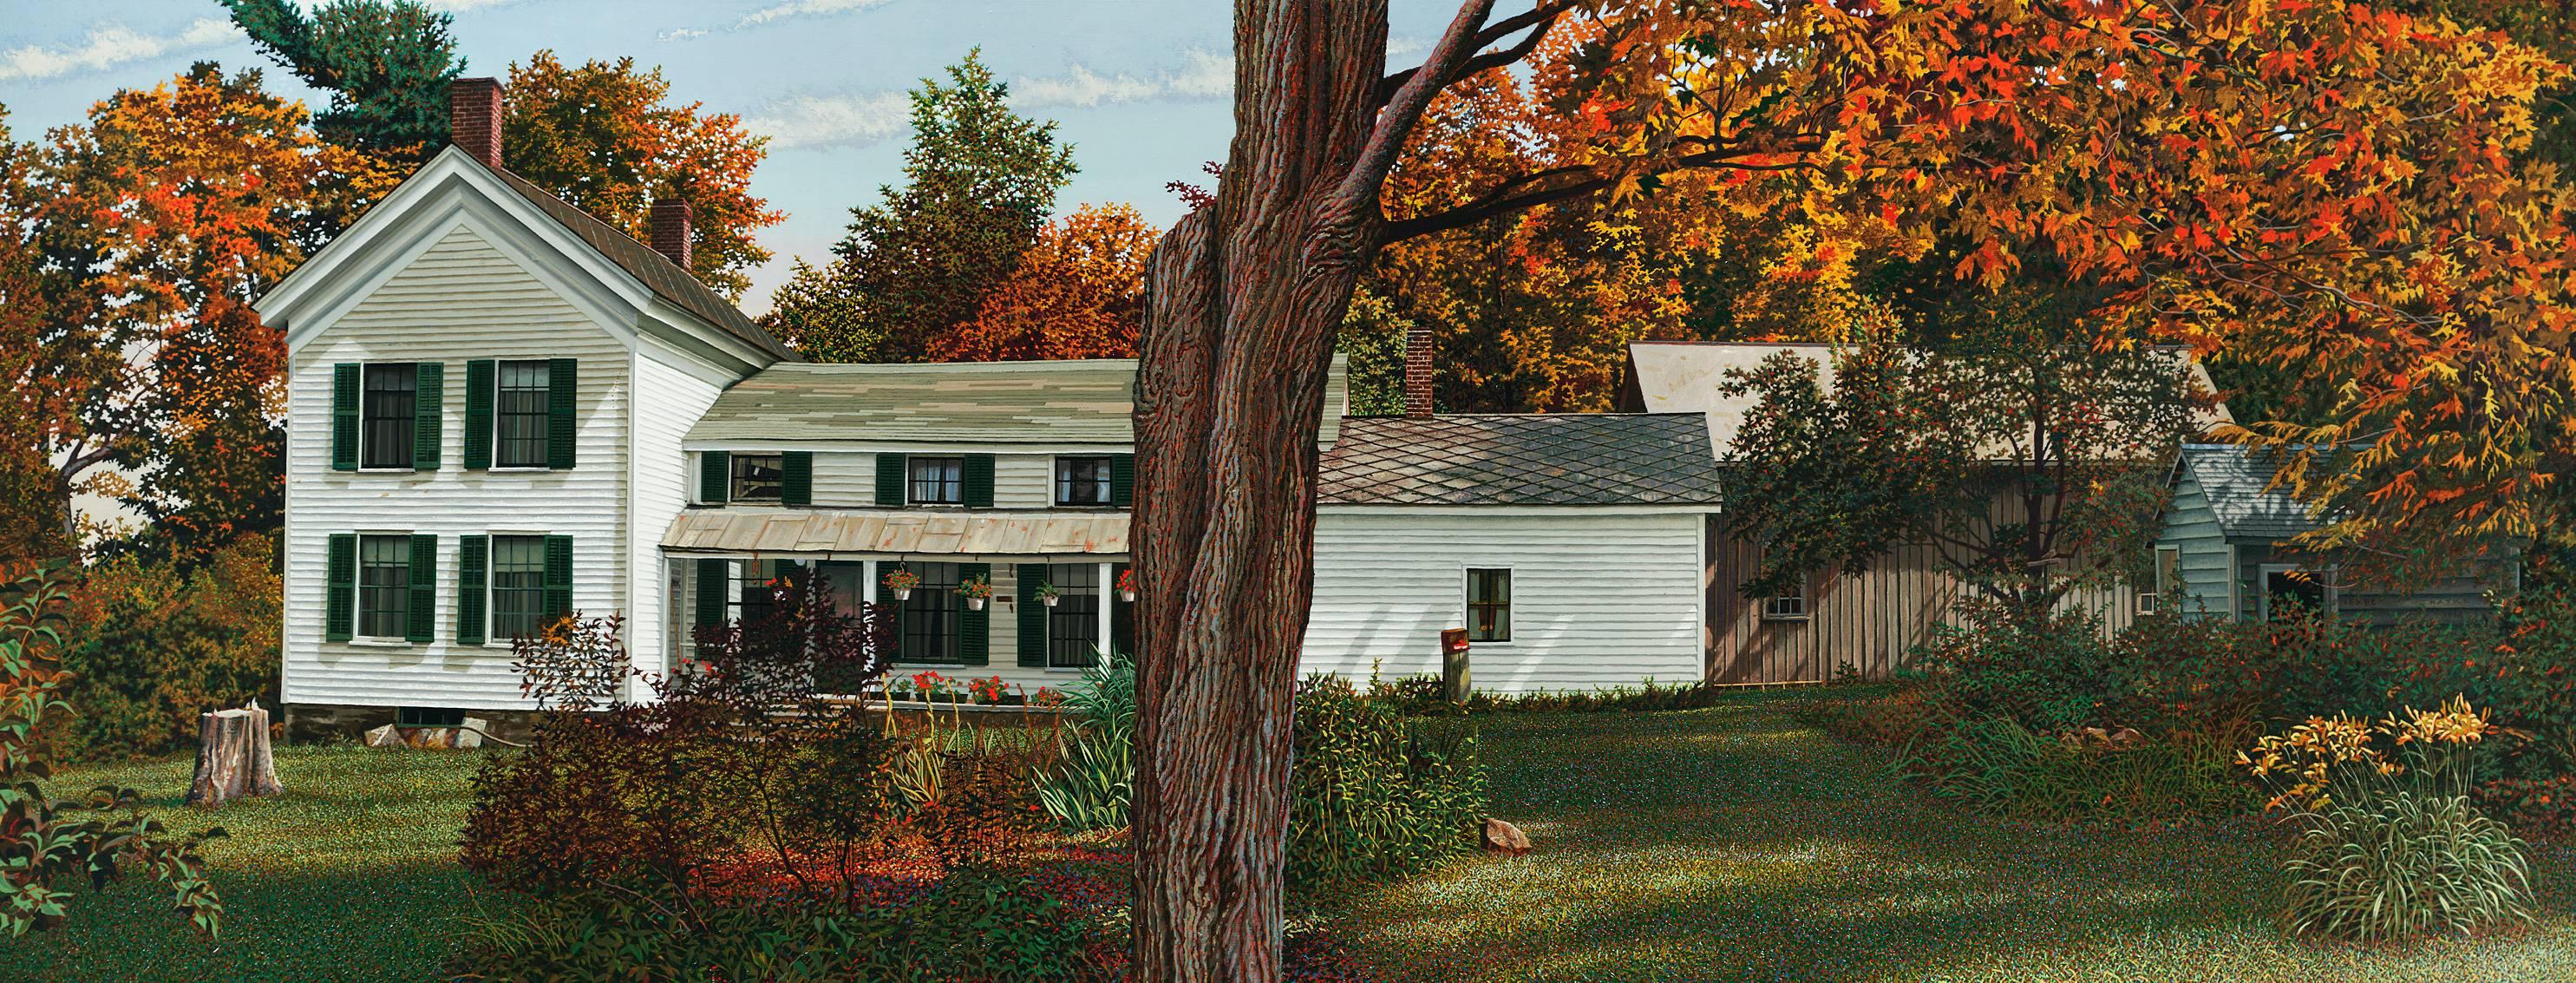 Walter Hatke’s Upstate, 1994-96 represents a house once owned by the Whitney family, located on Great Sacandaga Lake, north of Schenectady and west of Saratoga Springs, New York. He is currently a Professor of Visual Arts at Union College in